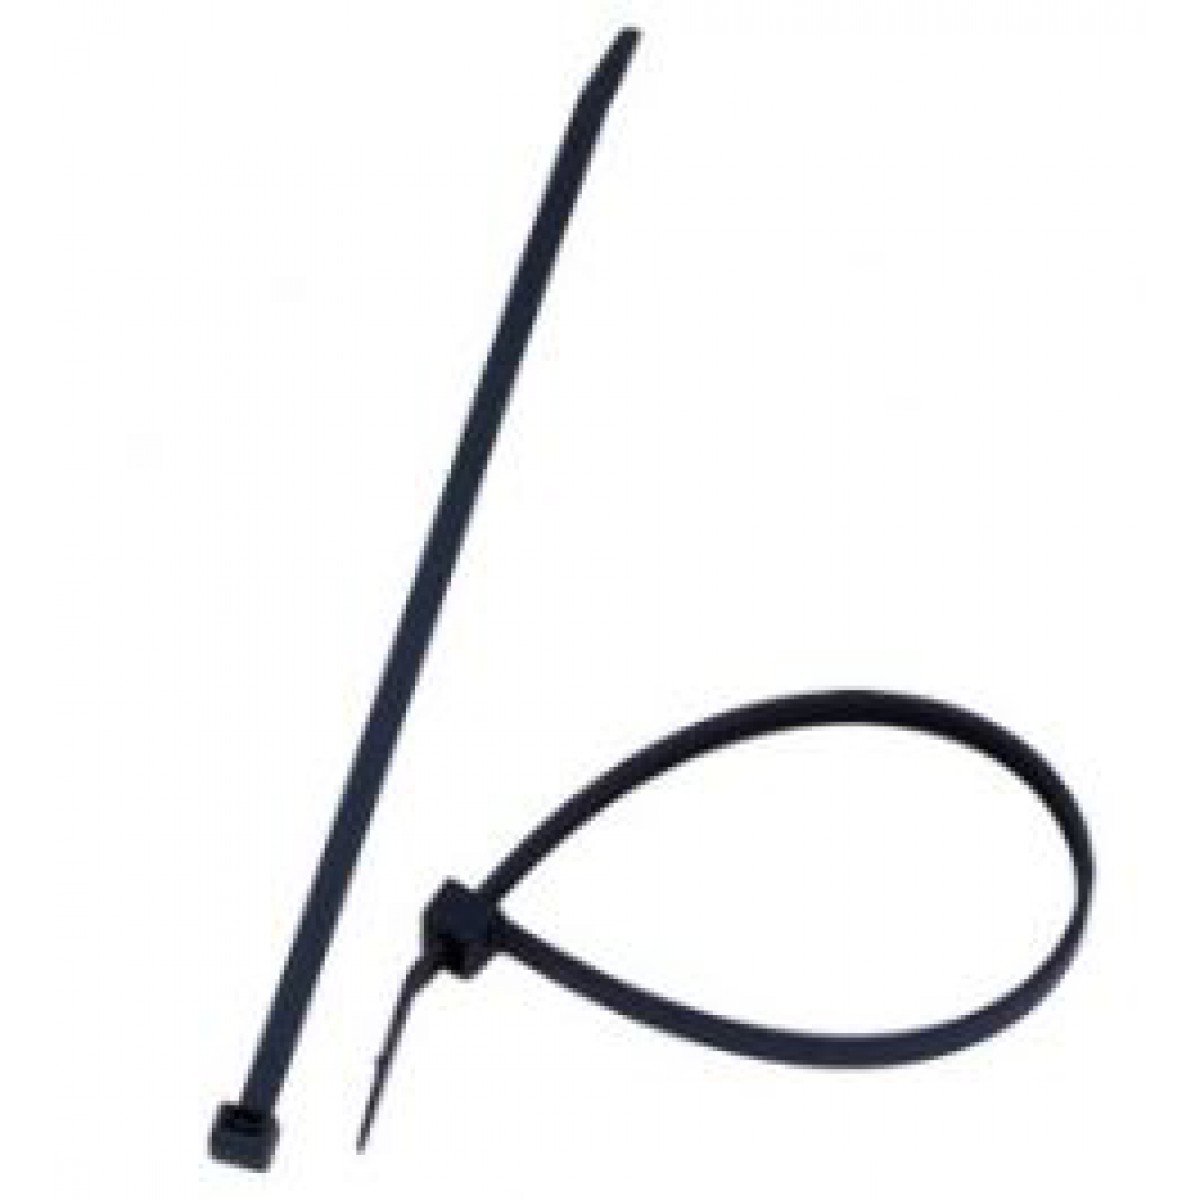 Detectable Nylon Cable Ties